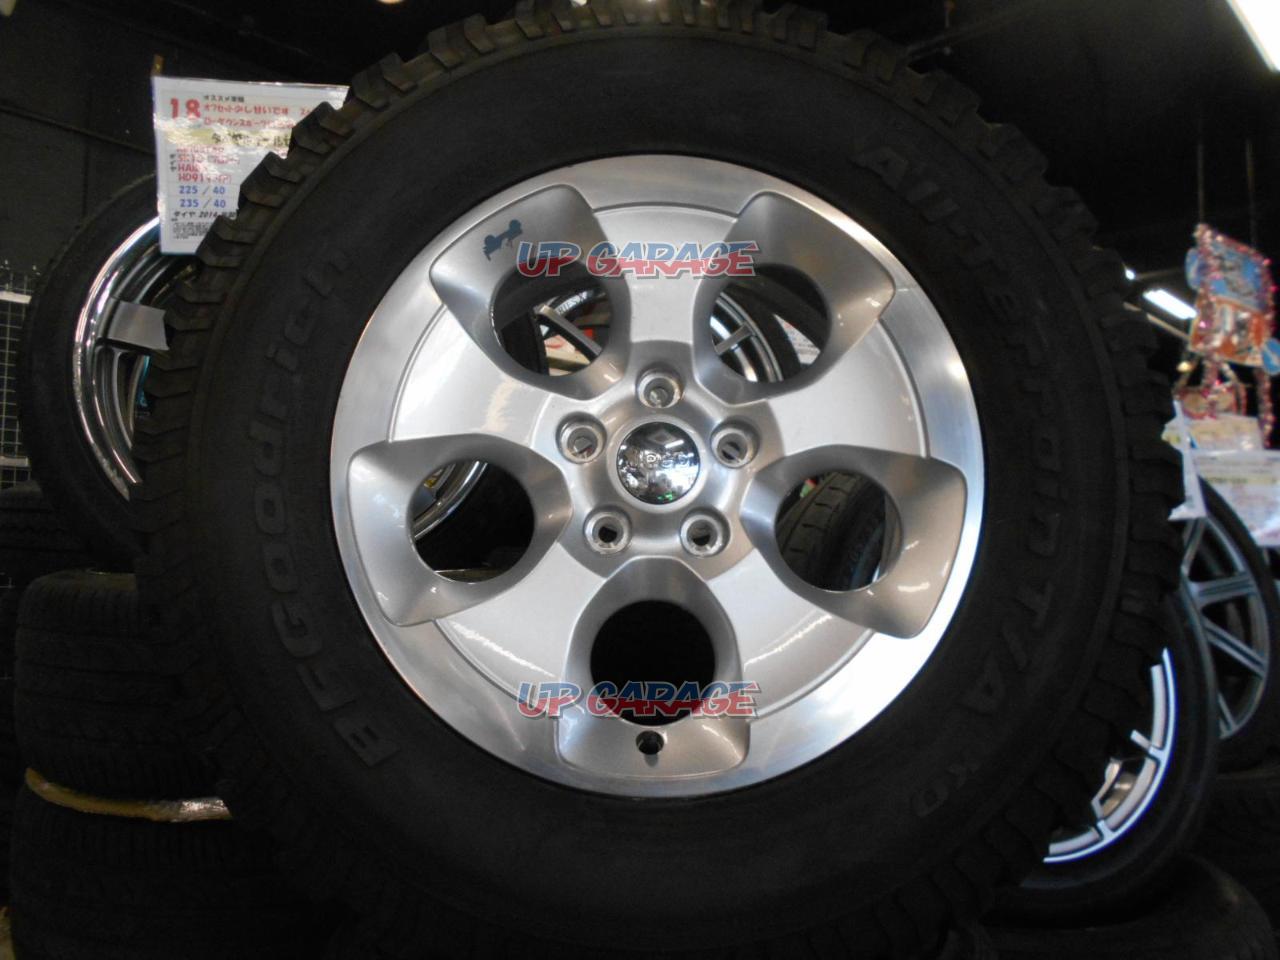 Jeep Wrangler Unlimited Sahara Previous Term Original Wheel + BFGoodrich All -Terrain T / A Tire Is 275/65 Wide Size! +44127-5H for Sale |  Croooober